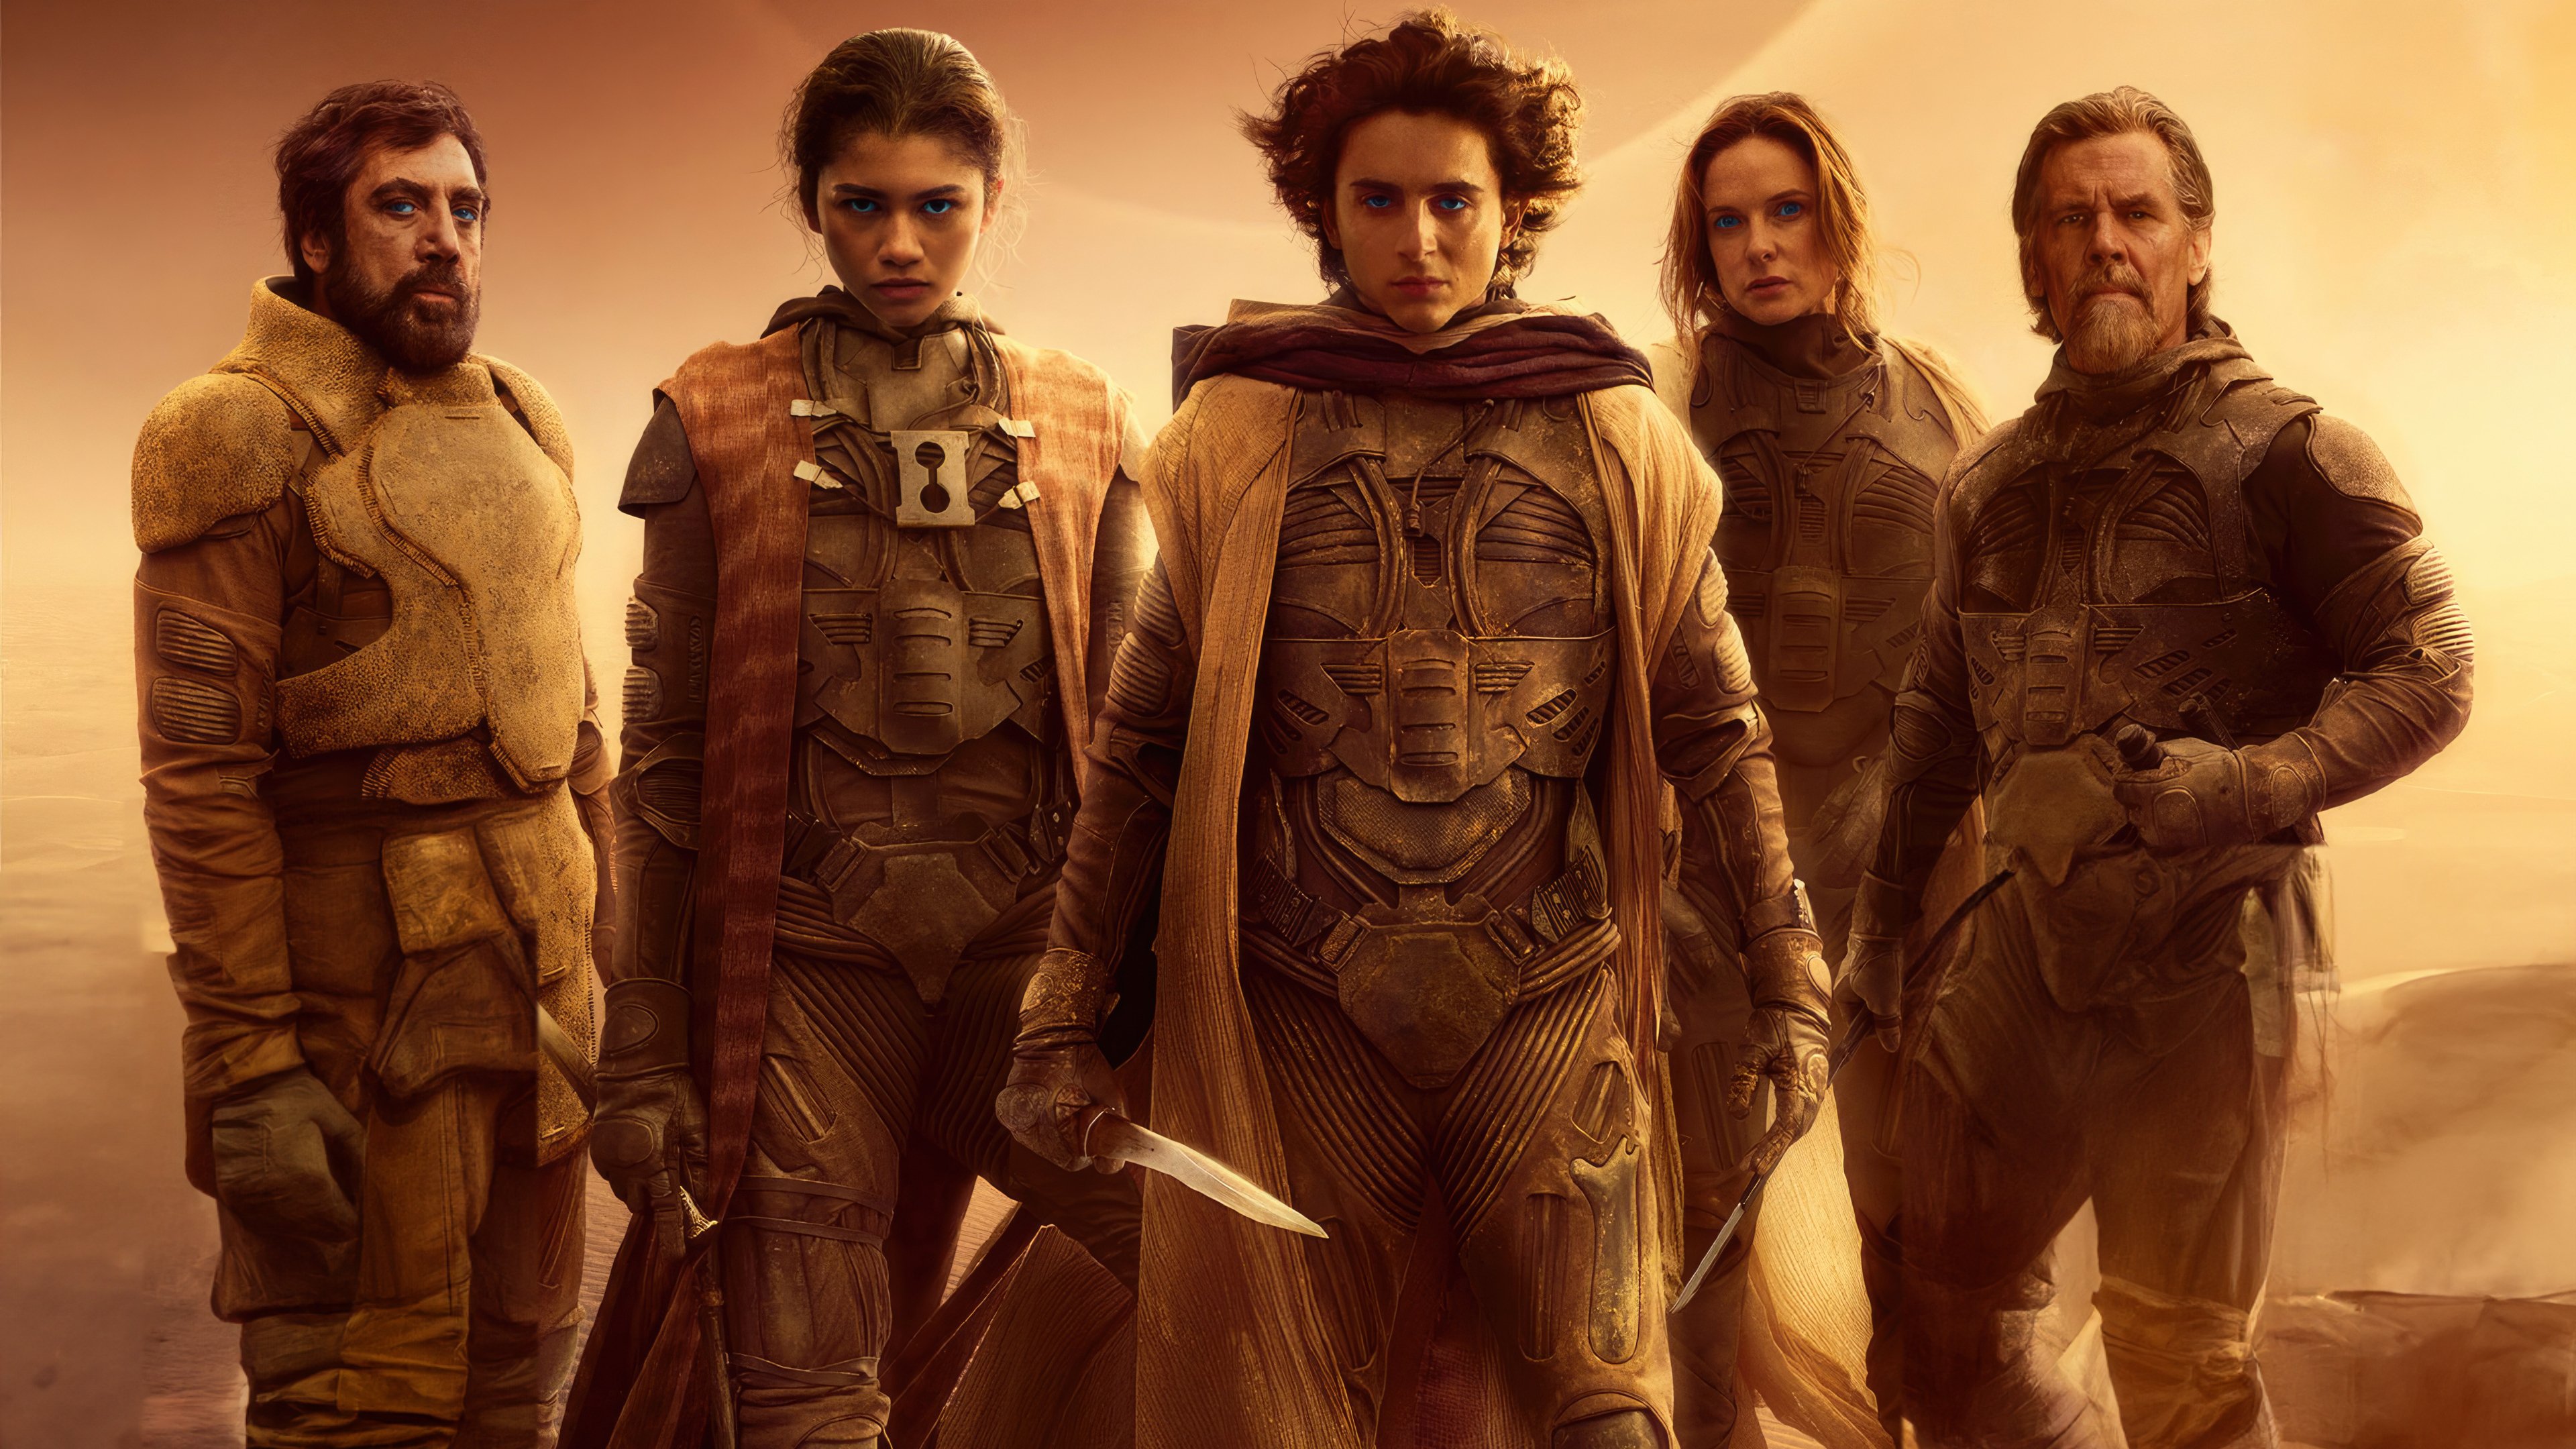 Dune Part 2 wallpaper Resolution 3840x2160 | Best Download this awesome wallpaper - Cool Wallpaper HD - CoolWallpaper-HD.com